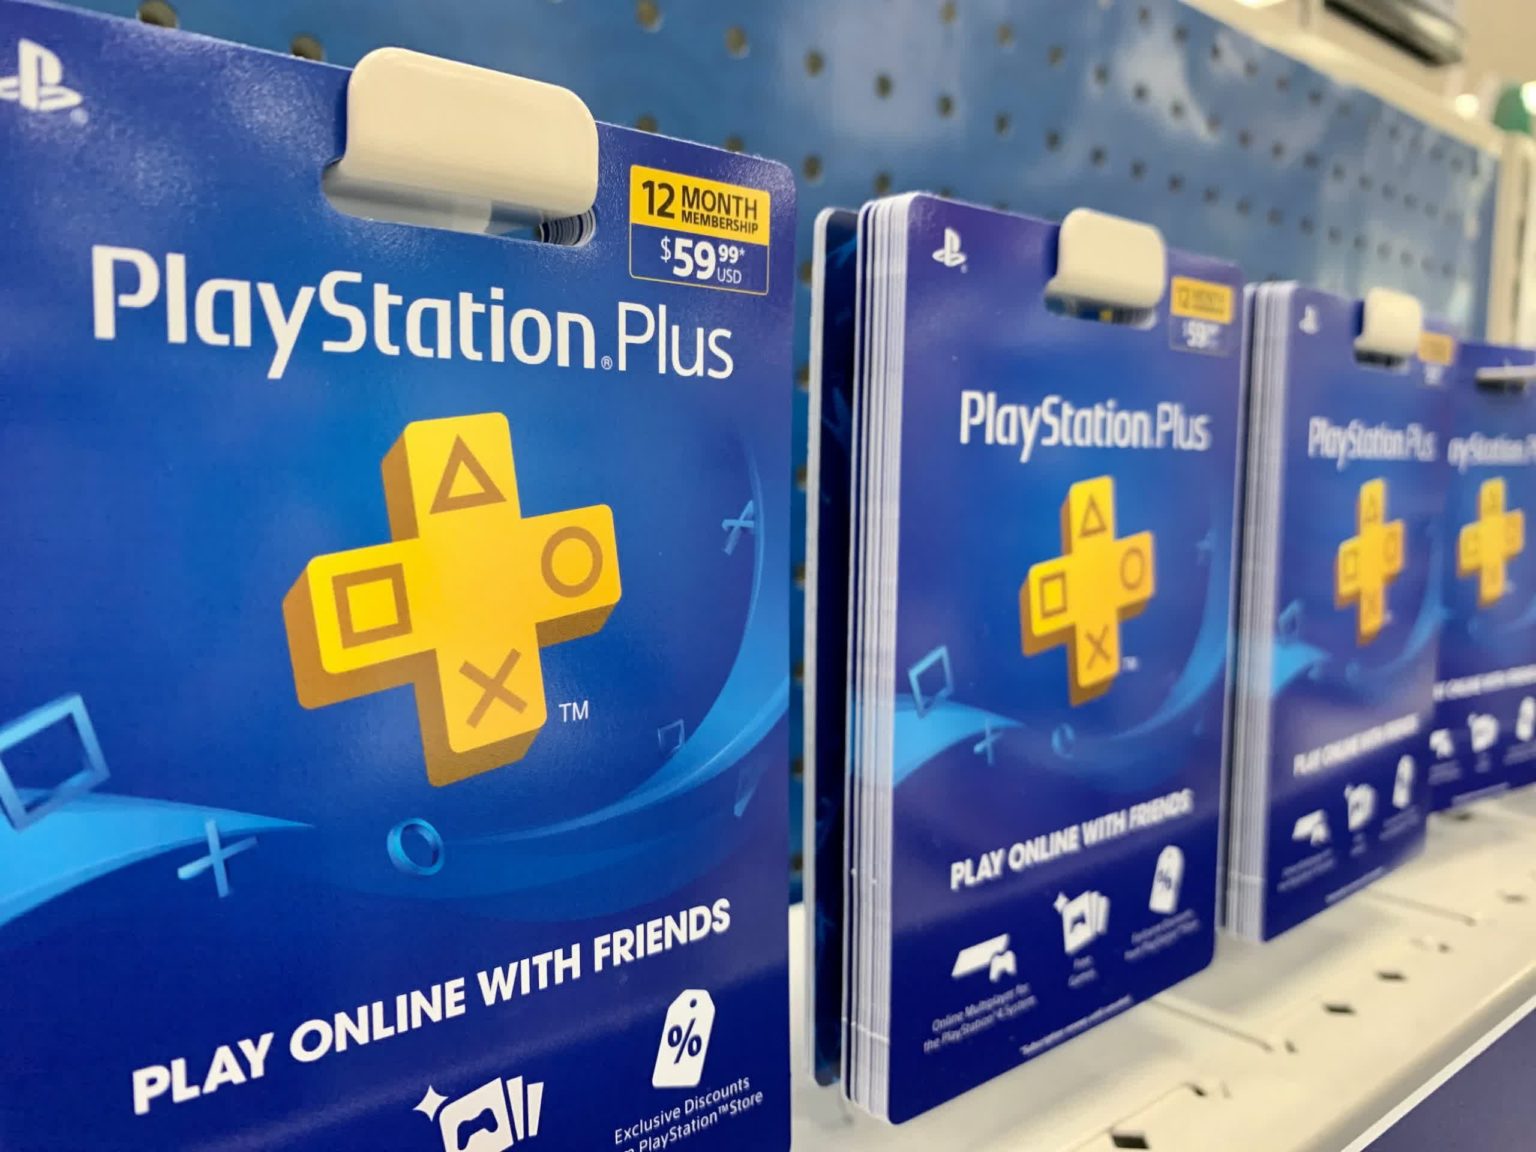 Most kids want game currencies and subscriptions instead of physical titles for Christmas